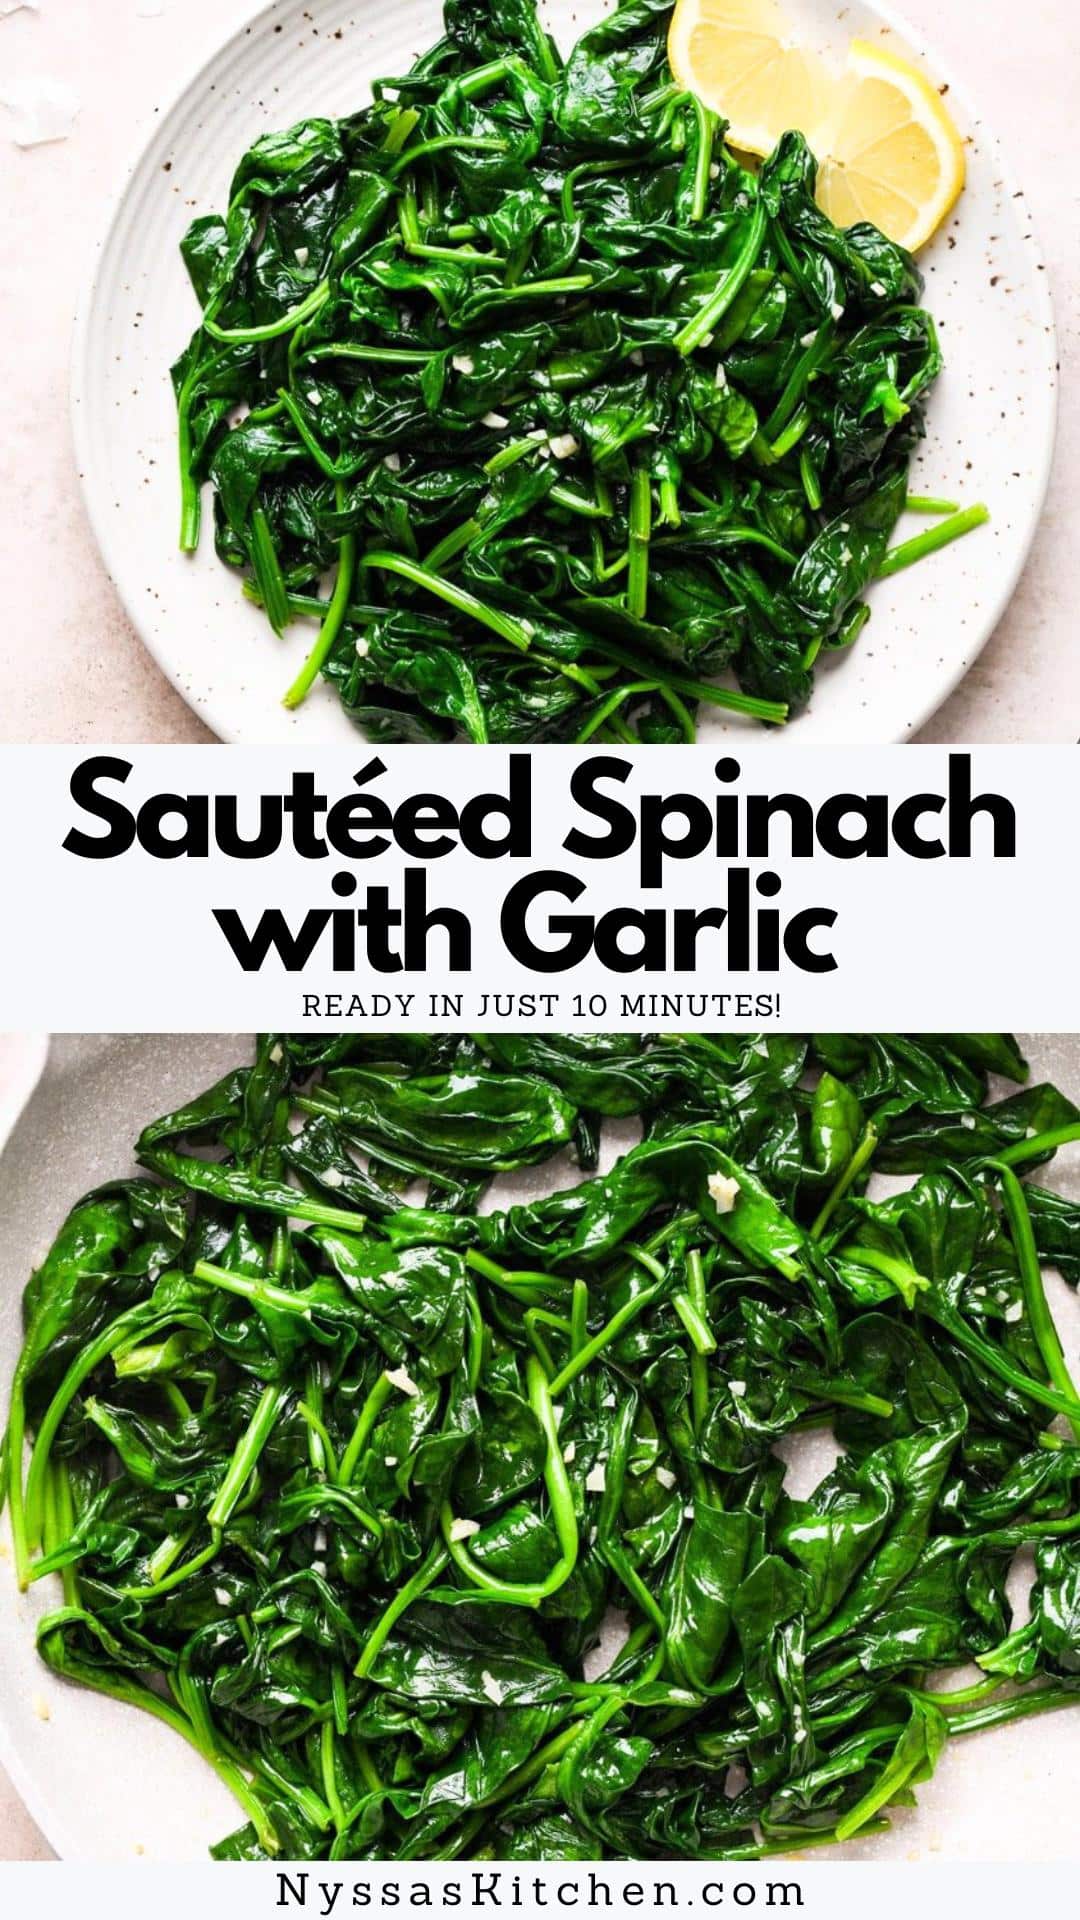 This 5 ingredient sautéed spinach with garlic recipe is a super easy side dish that is made in a skillet in just 10 minutes! It pairs beautifully with many different types of meals, from pan seared chicken to oven roasted fish. A simple back pocket veggie recipe that's perfect for any night of the week!